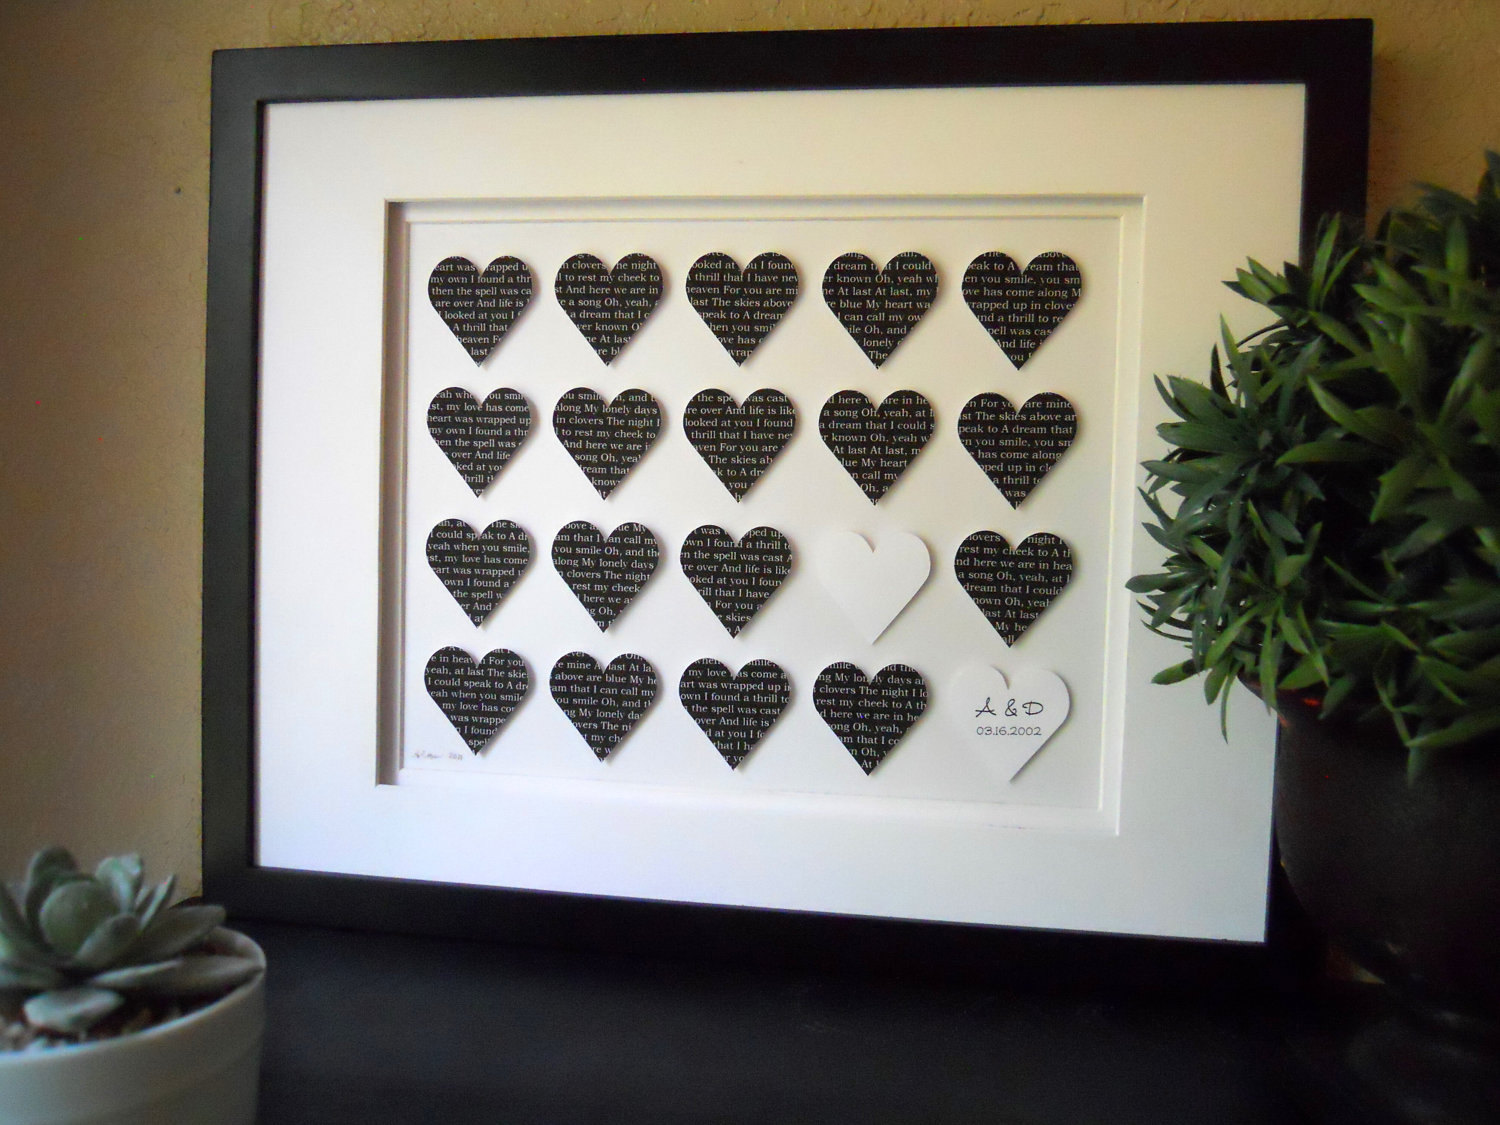 gift dance present anniversary unique gifts personalized guests hearts thank special paper lyric memorable cut into couples diy godfatherstyle